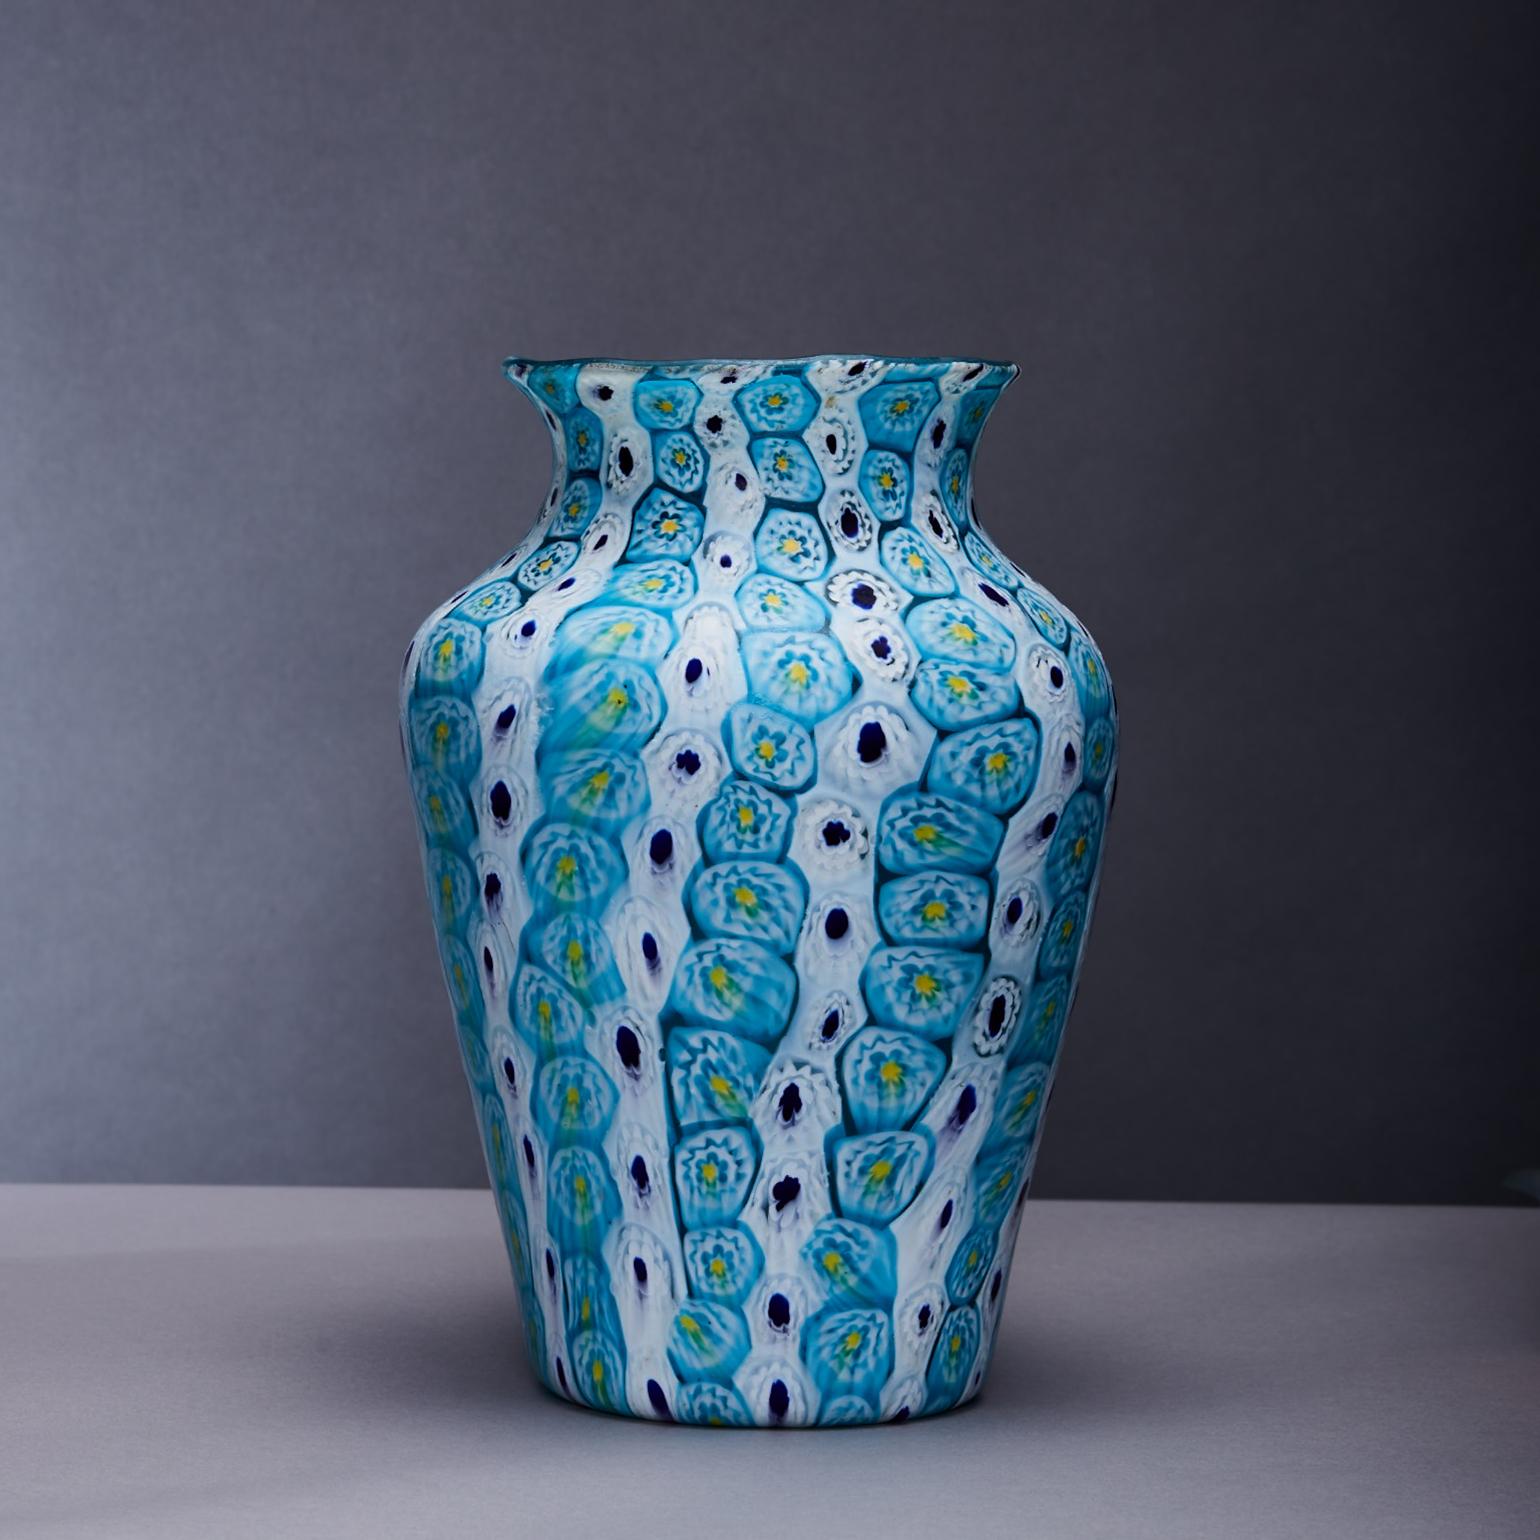 Murine glass production started in the Middle East and dates back over 4,000 years ago and was revived by Venetian glass makers. The birth of Murine vases would have been by organizing colored into distinct patterns, whilst the glass molten canes